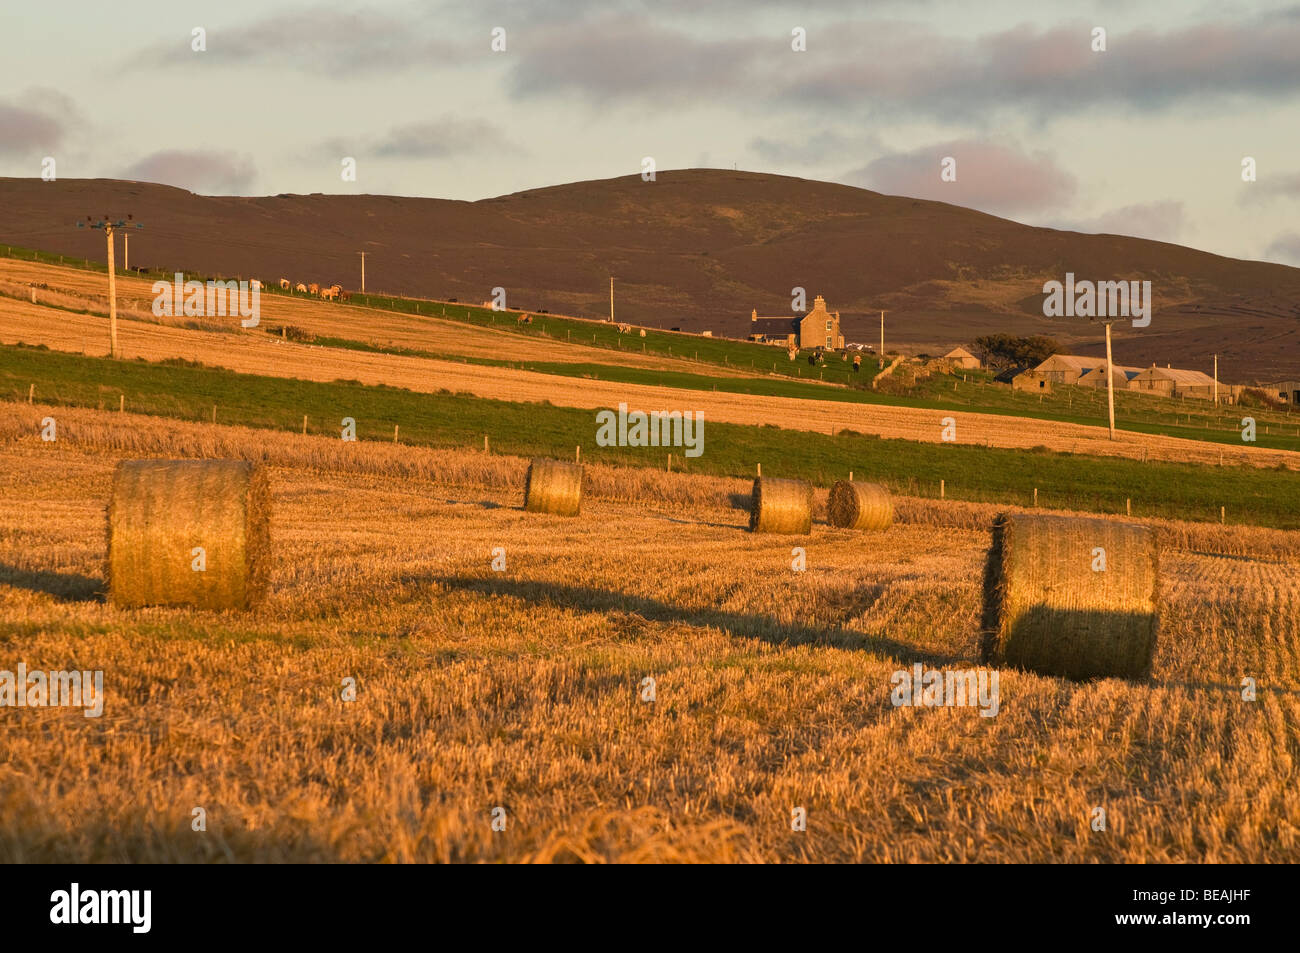 dh Straw bales of hay STENNESS ORKNEY Evening dusk light over bale agriculture field uk Stock Photo